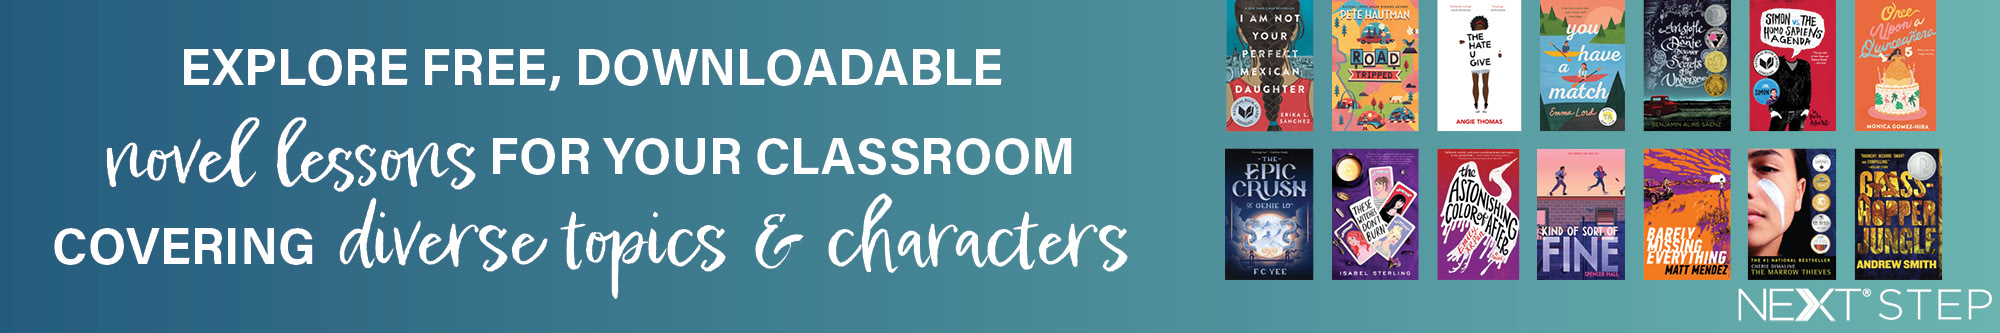 Explore free, downloadable novel lessons for your classroom covering diverse topics & characters—images of books and Next Step logo